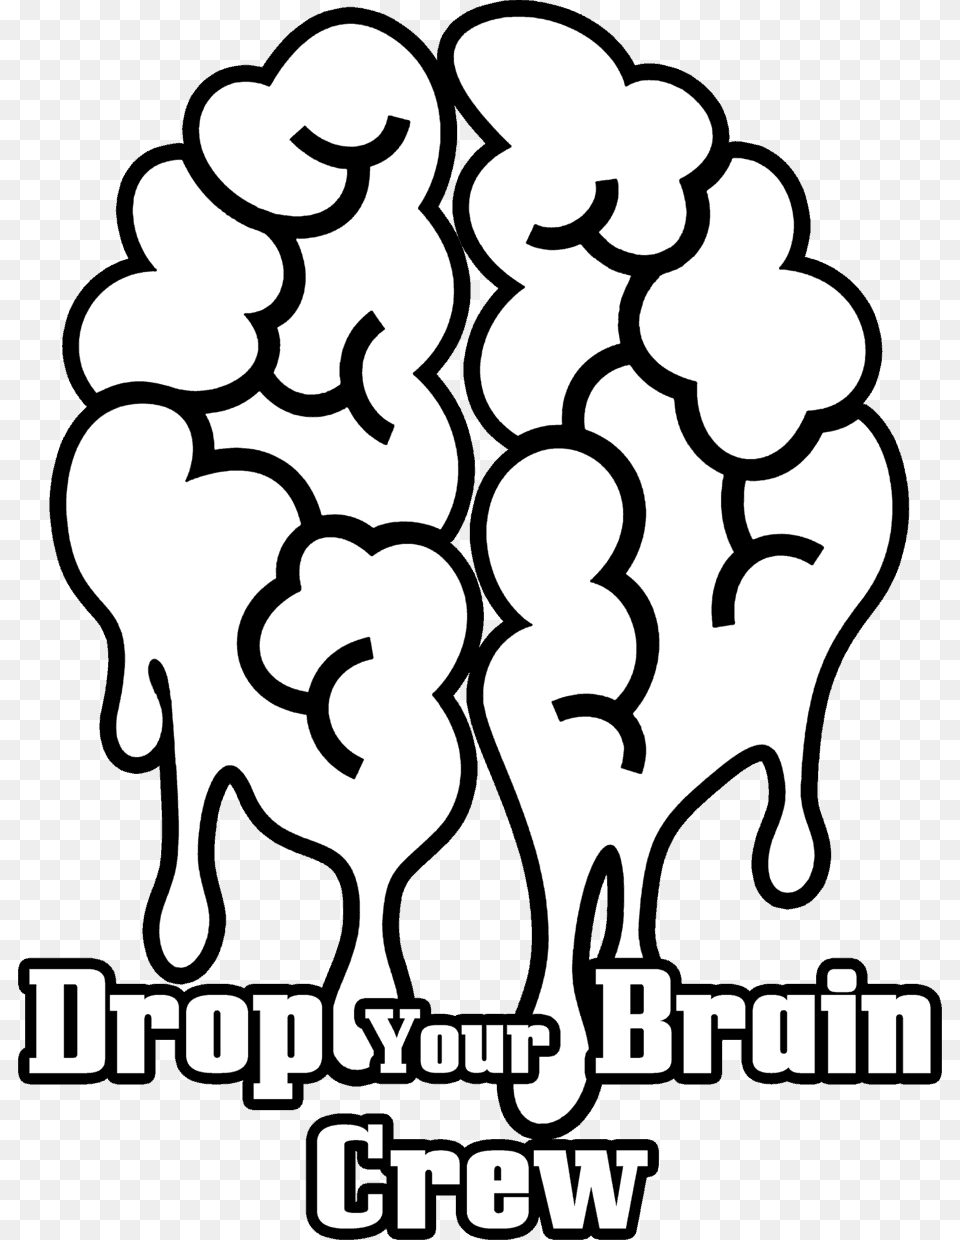 Check Out And Share Our Drop Your Brain Crew Interview Brain Flat Design, Stencil, Silhouette, Person Png Image